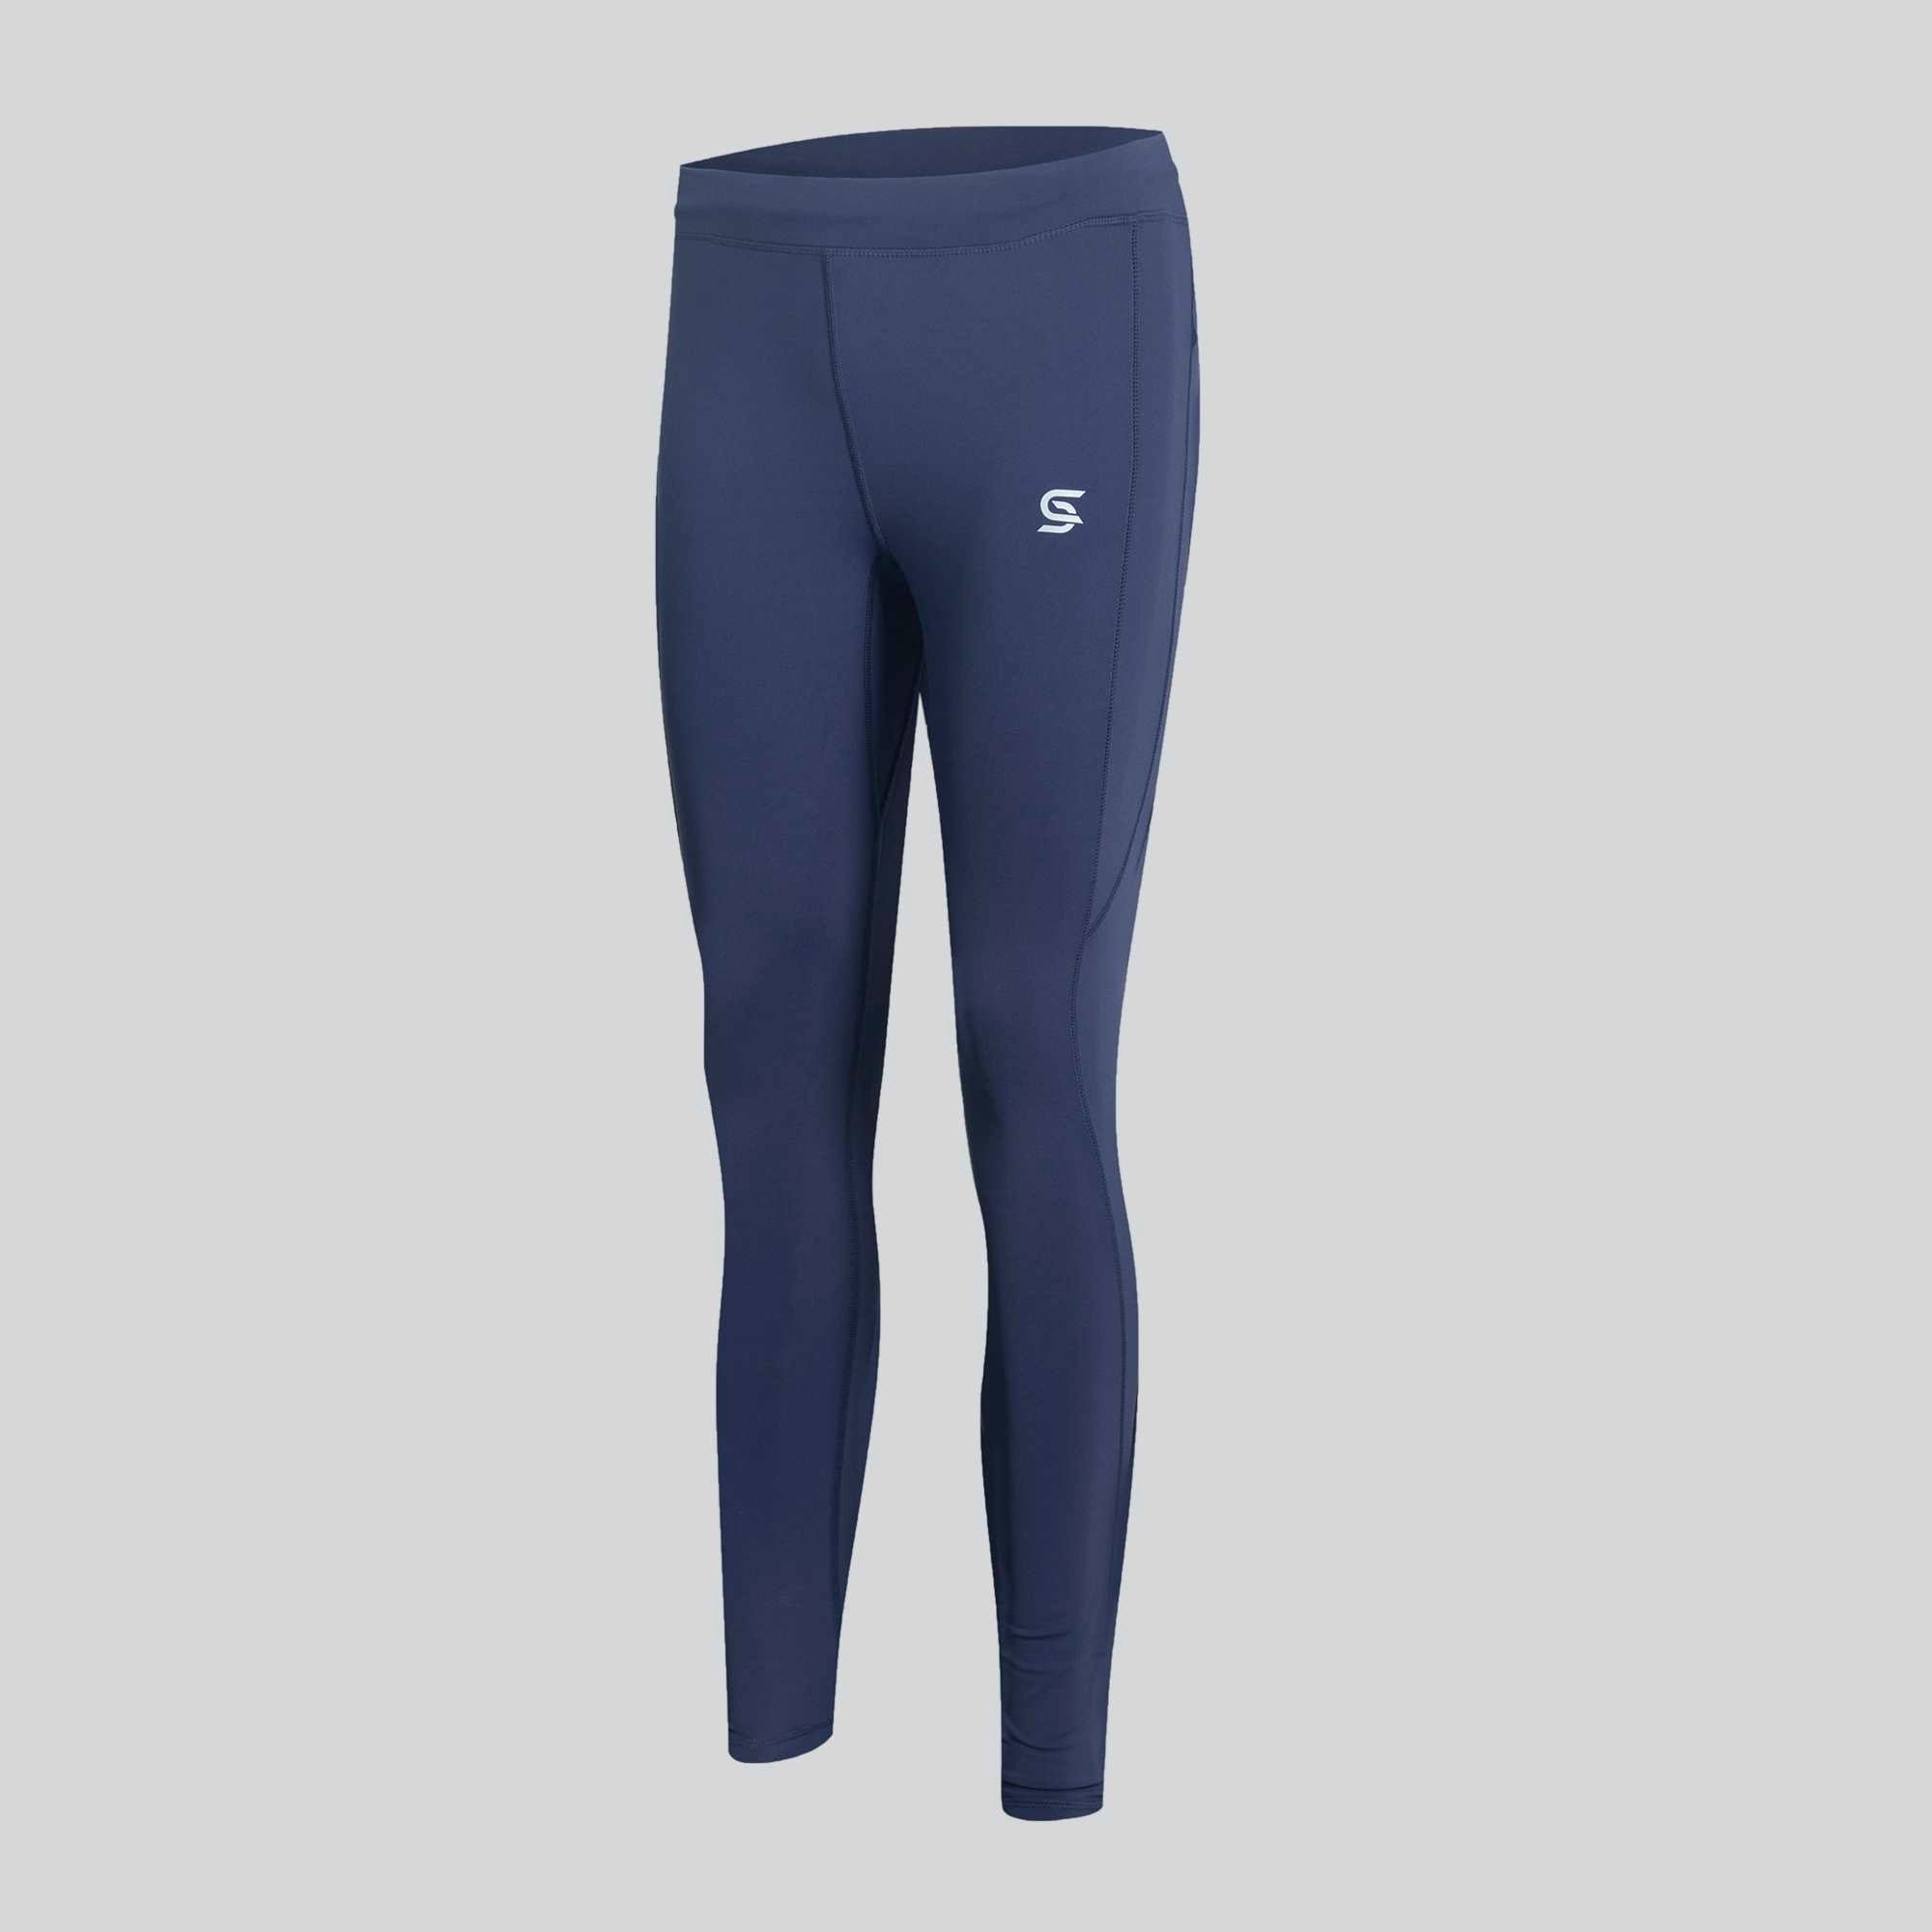 Compression Tights Navy Women's - Sports Cartel